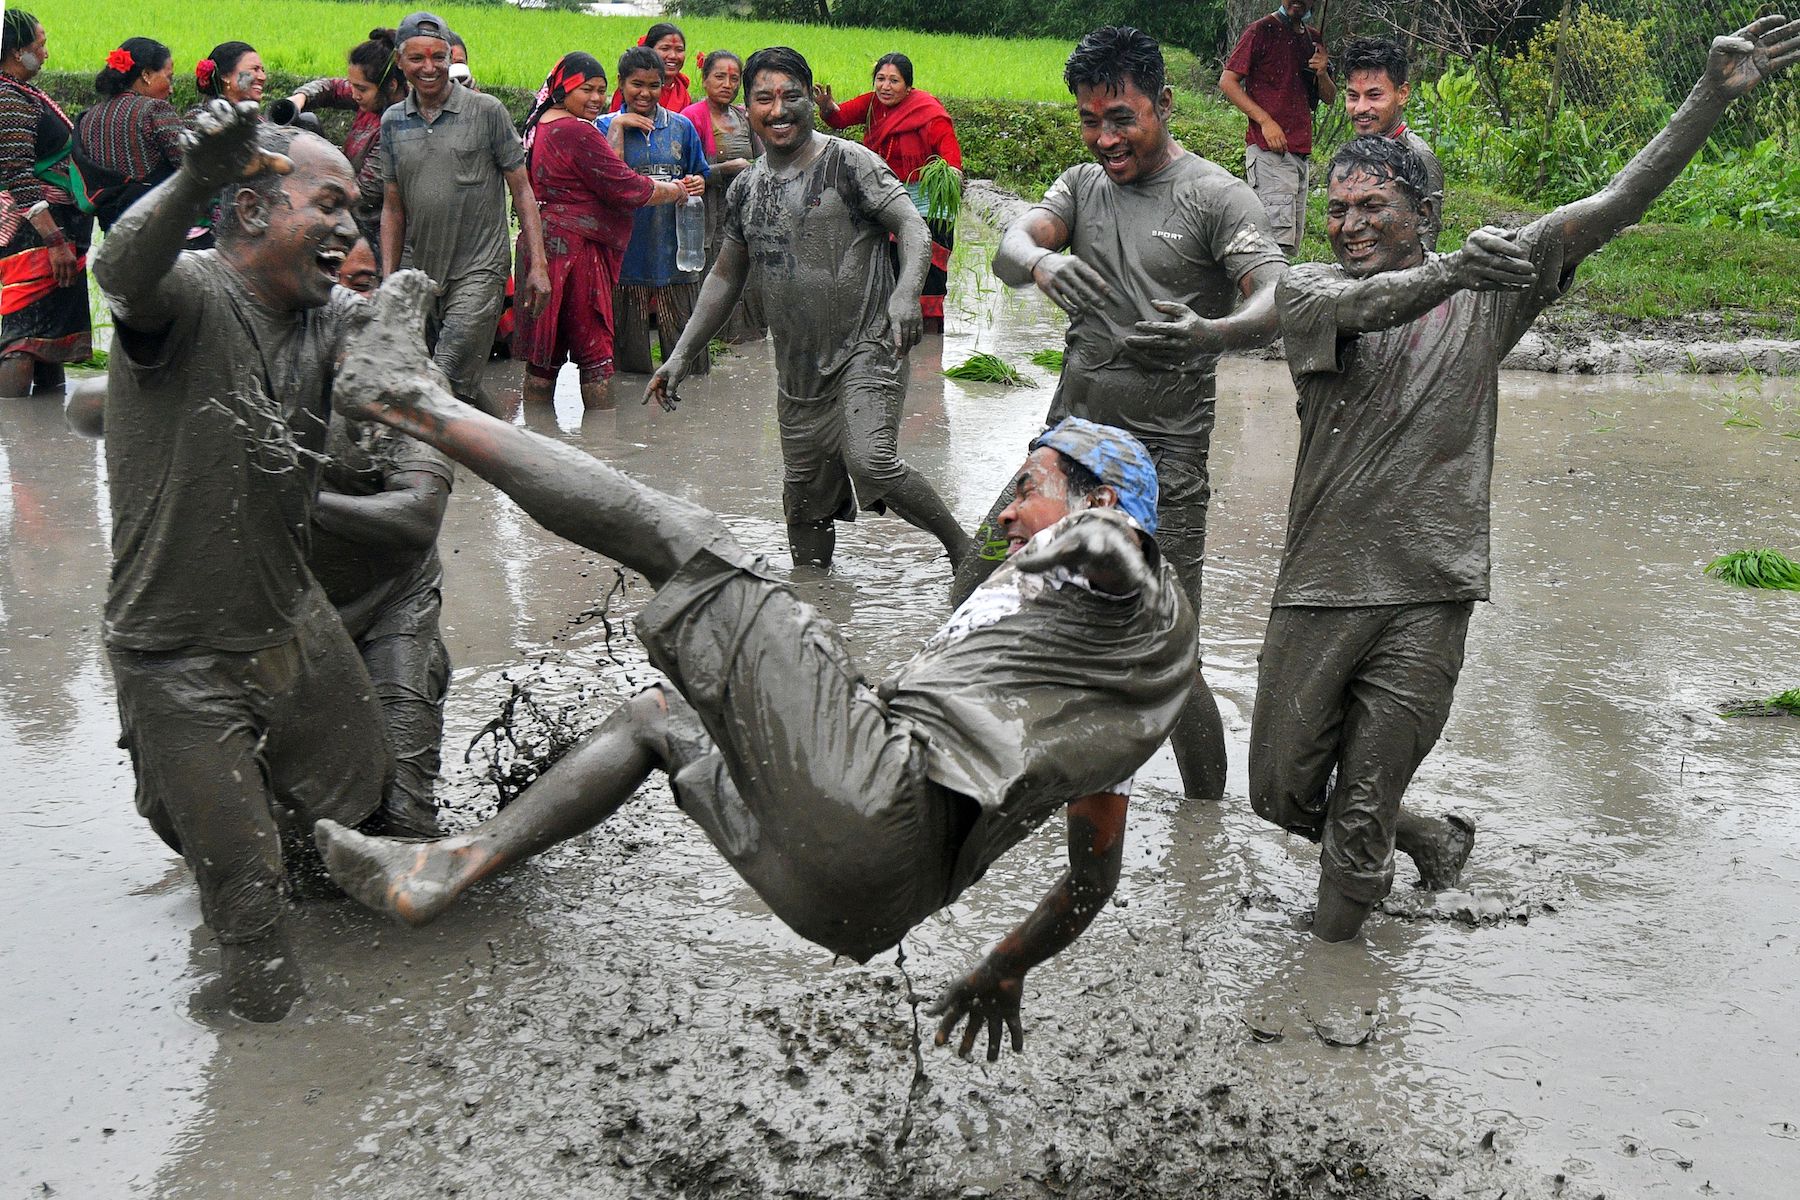 Three men throw another man into mud water in a paddy field. They are all covered in mud. Meanwhile, women are watching in the back.